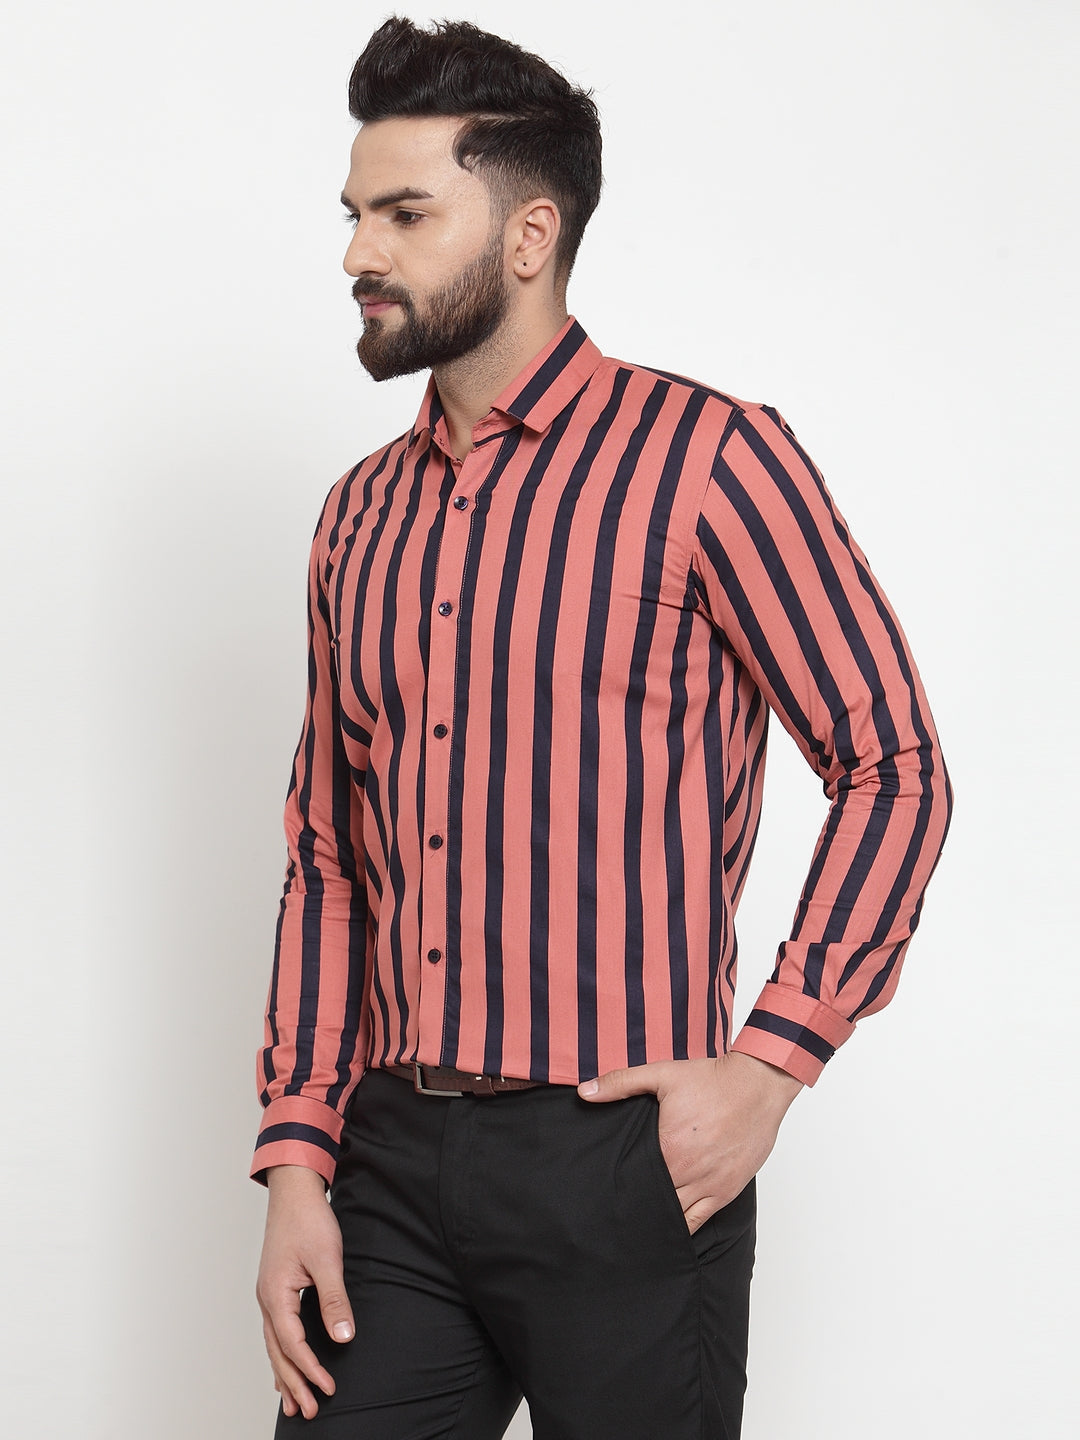 Men's Red Cotton Striped Formal Shirts ( SF 744Coral ) - Jainish